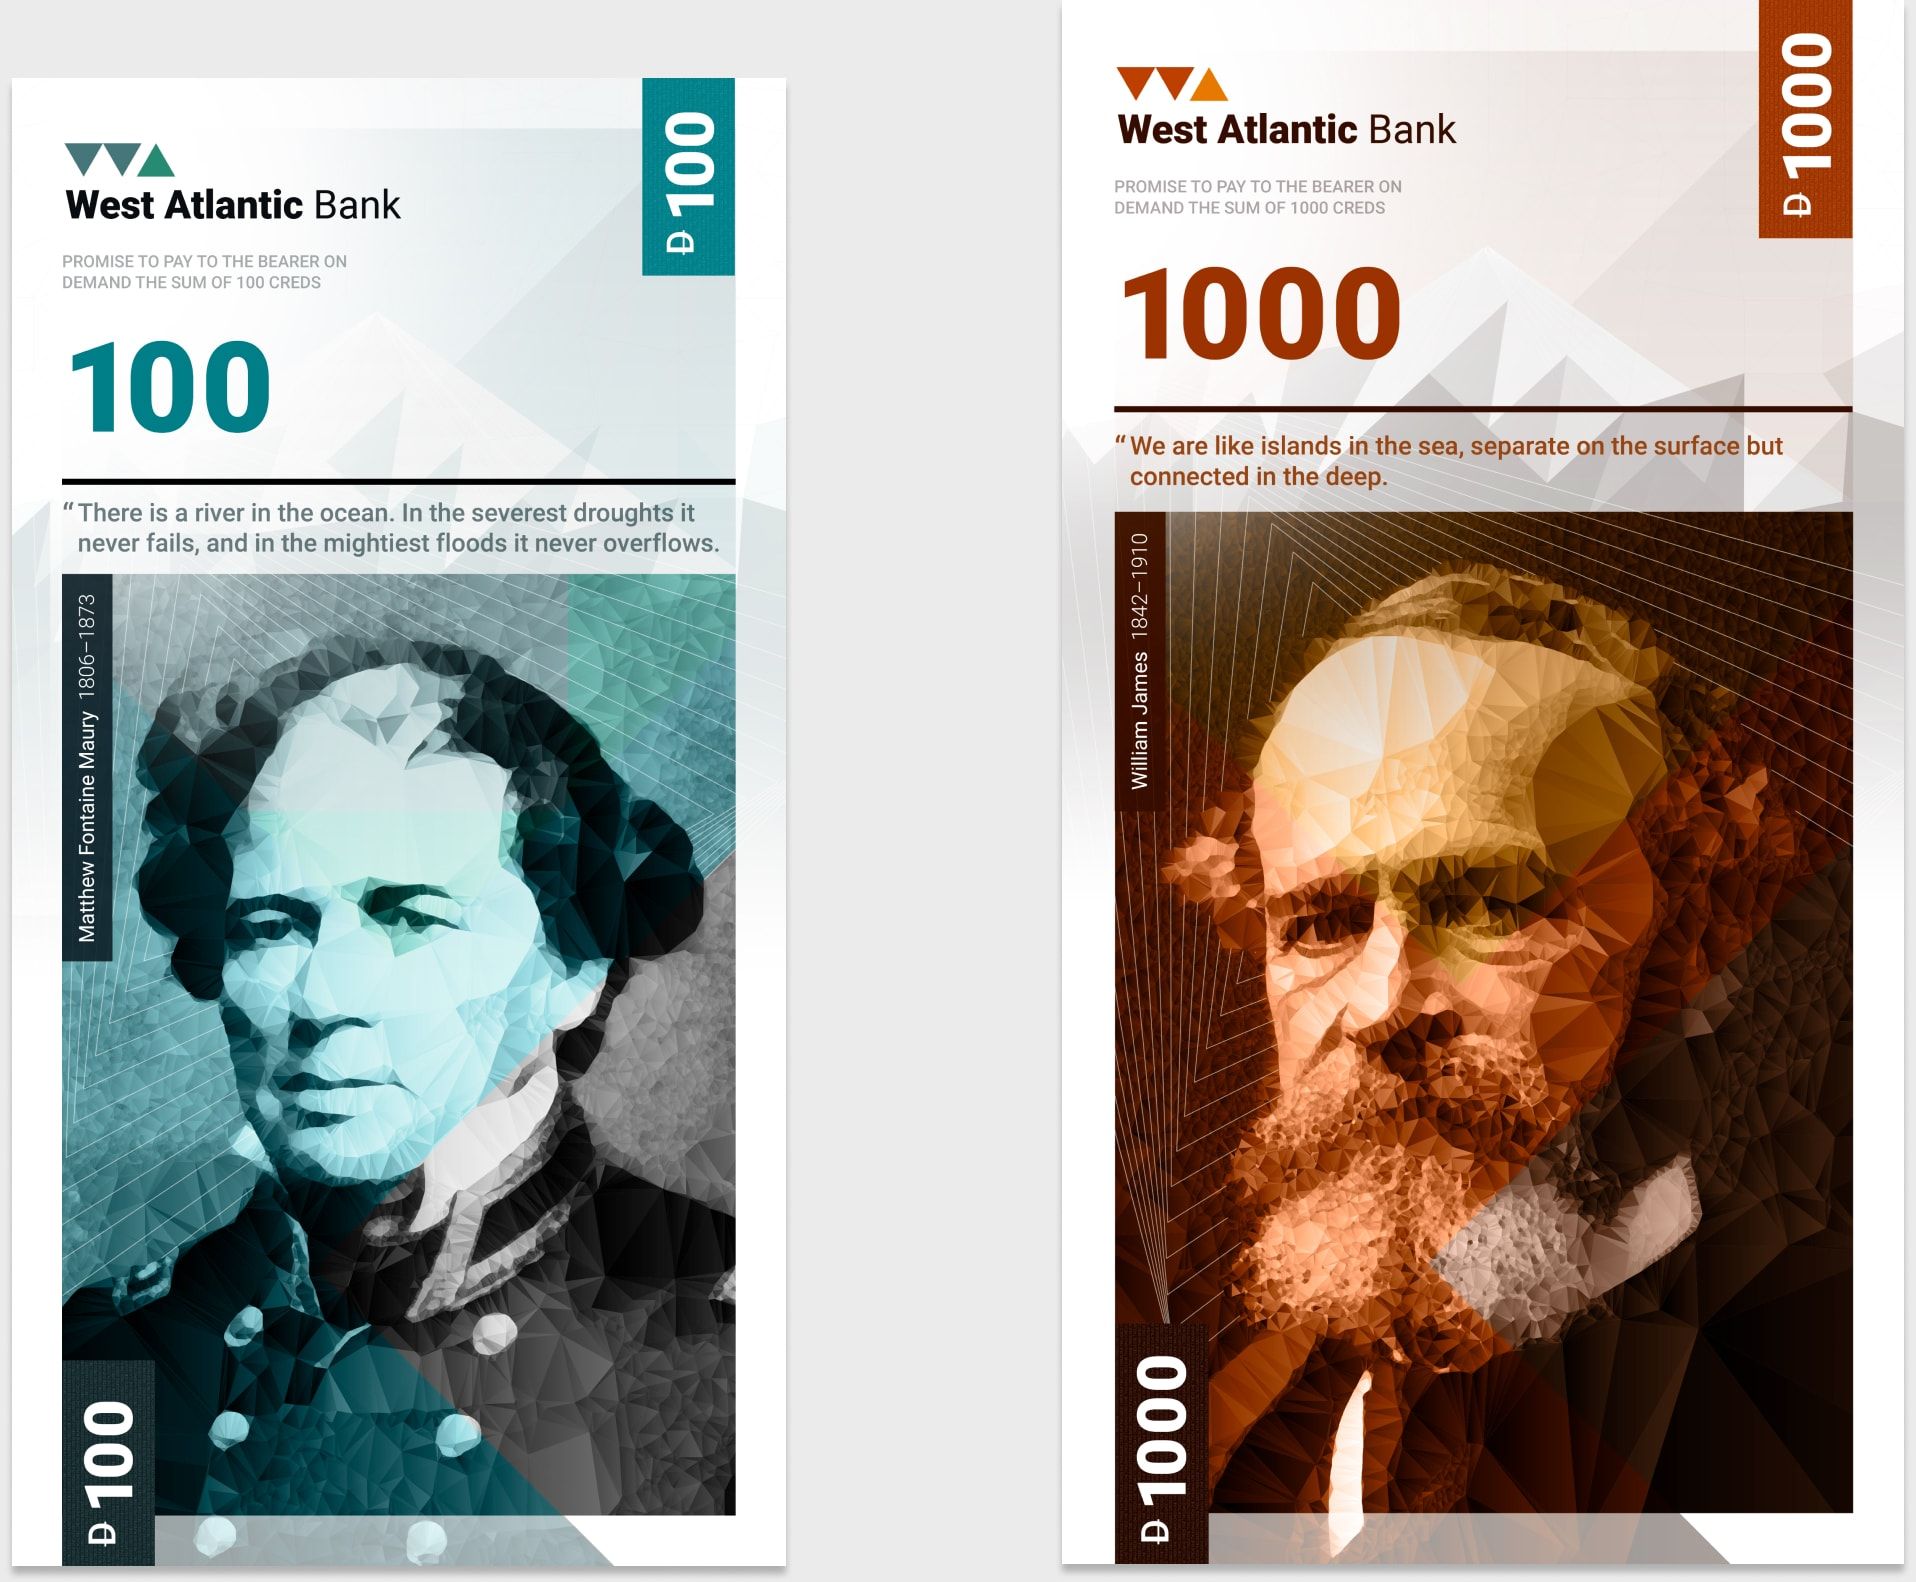 100 and 1000 Cred bank notes